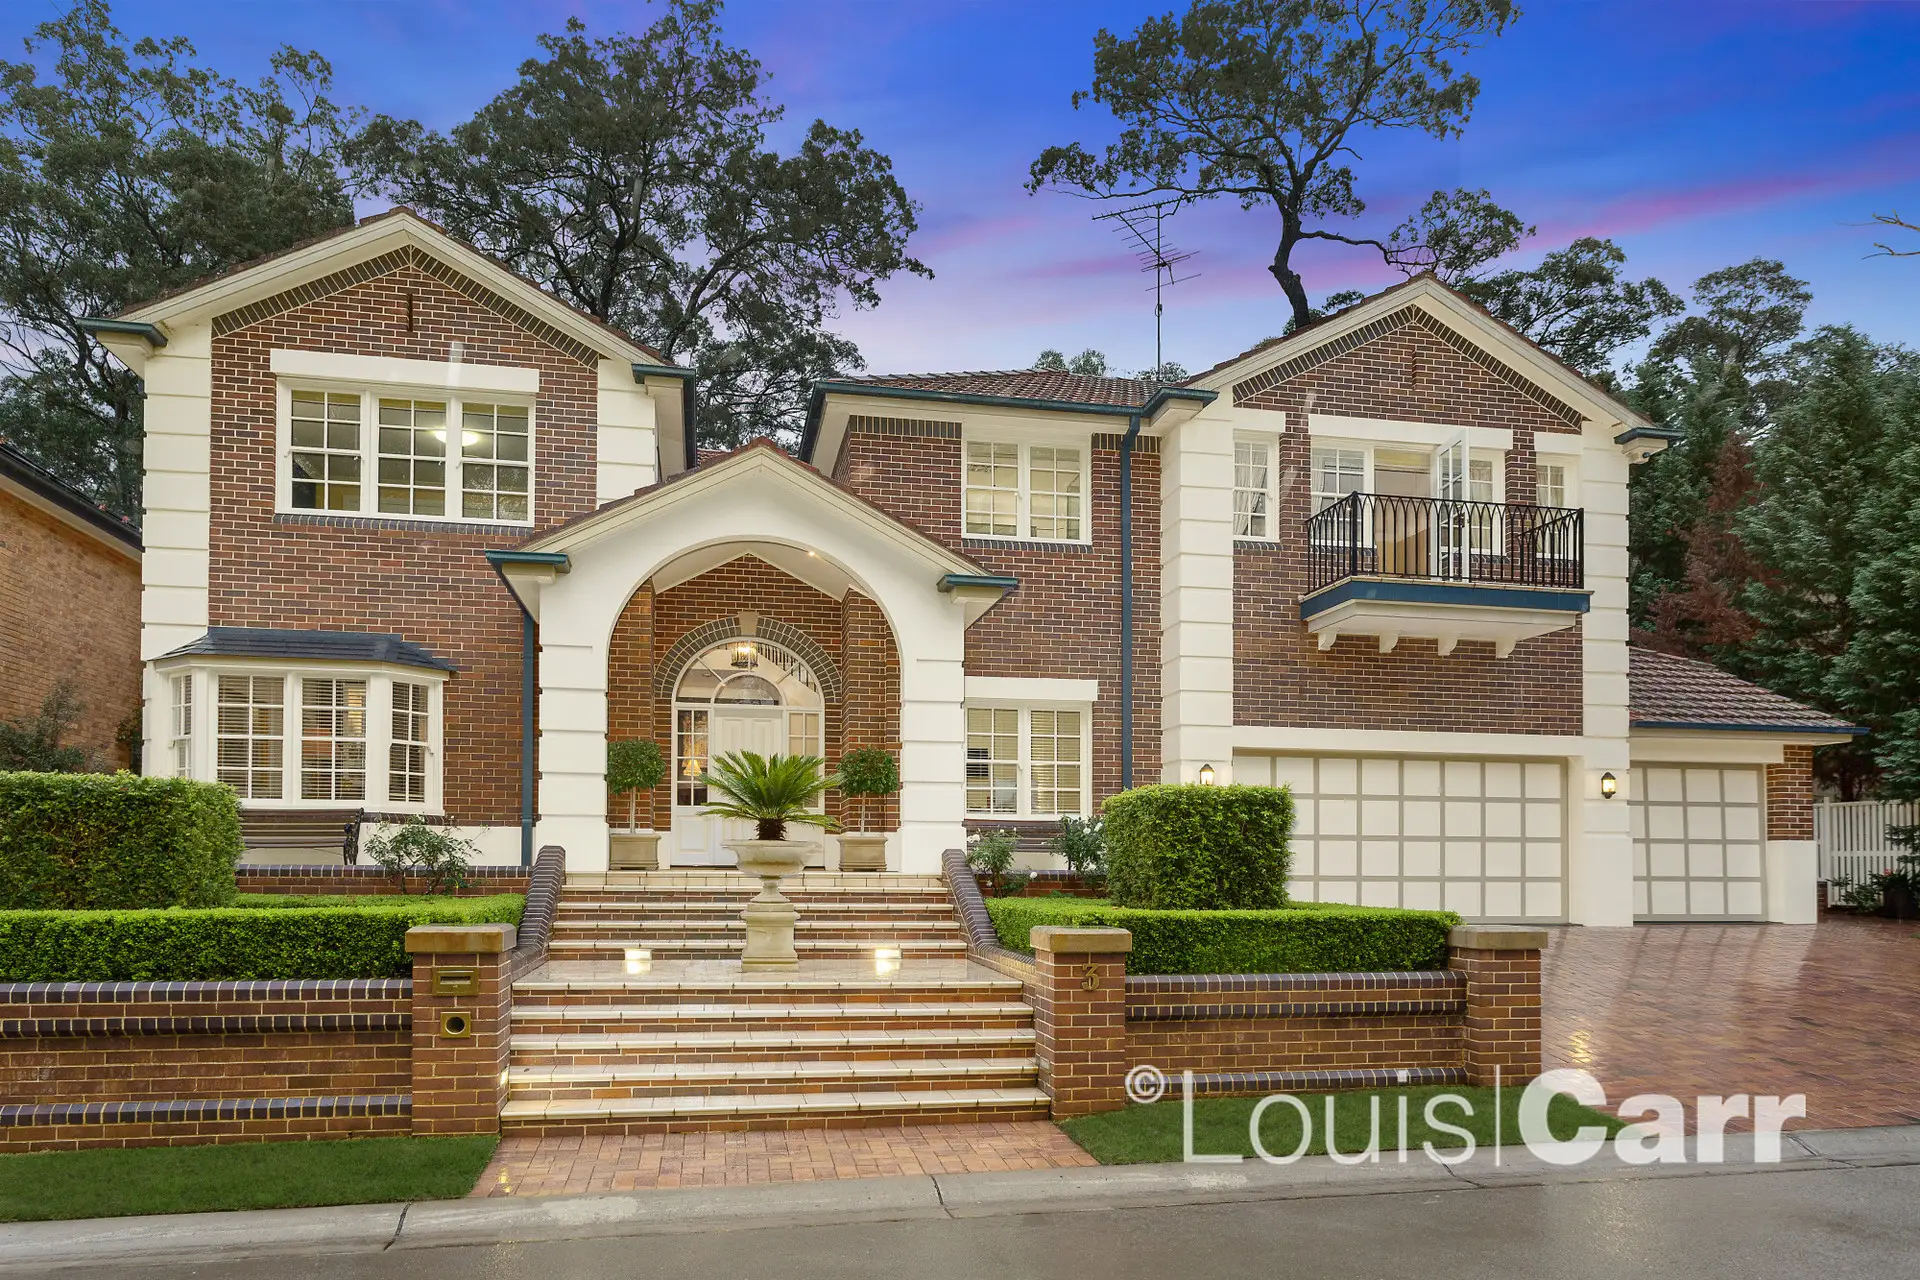 Photo #1: 3 Compton Green, West Pennant Hills - Sold by Louis Carr Real Estate